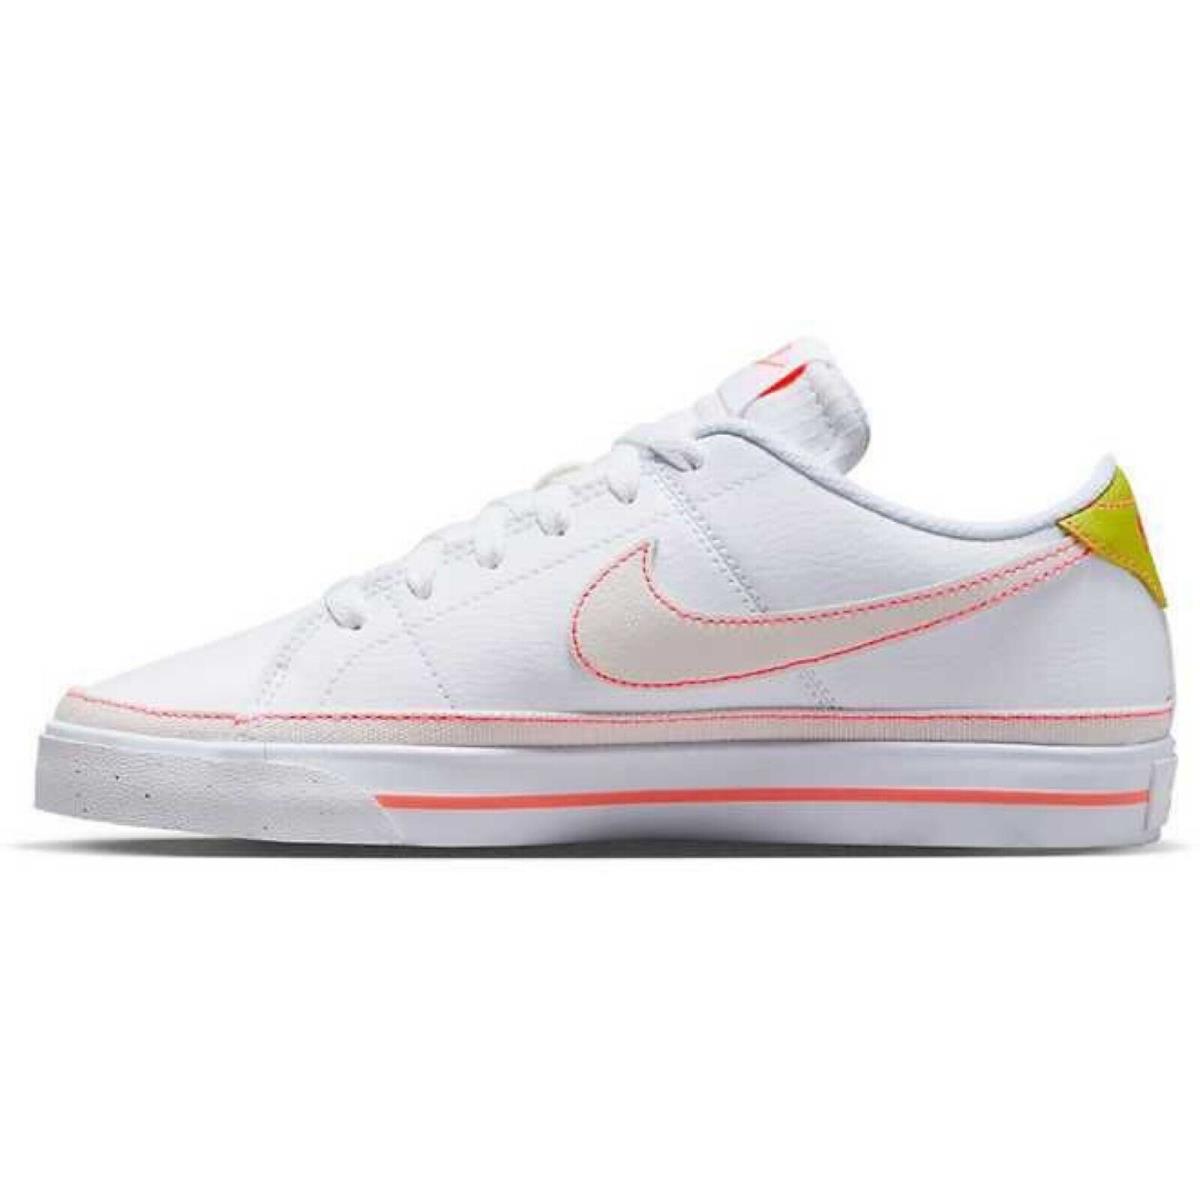 Nike shoes Court Legacy - White , White/Pink Punch/Green Cactus Manufacturer 7